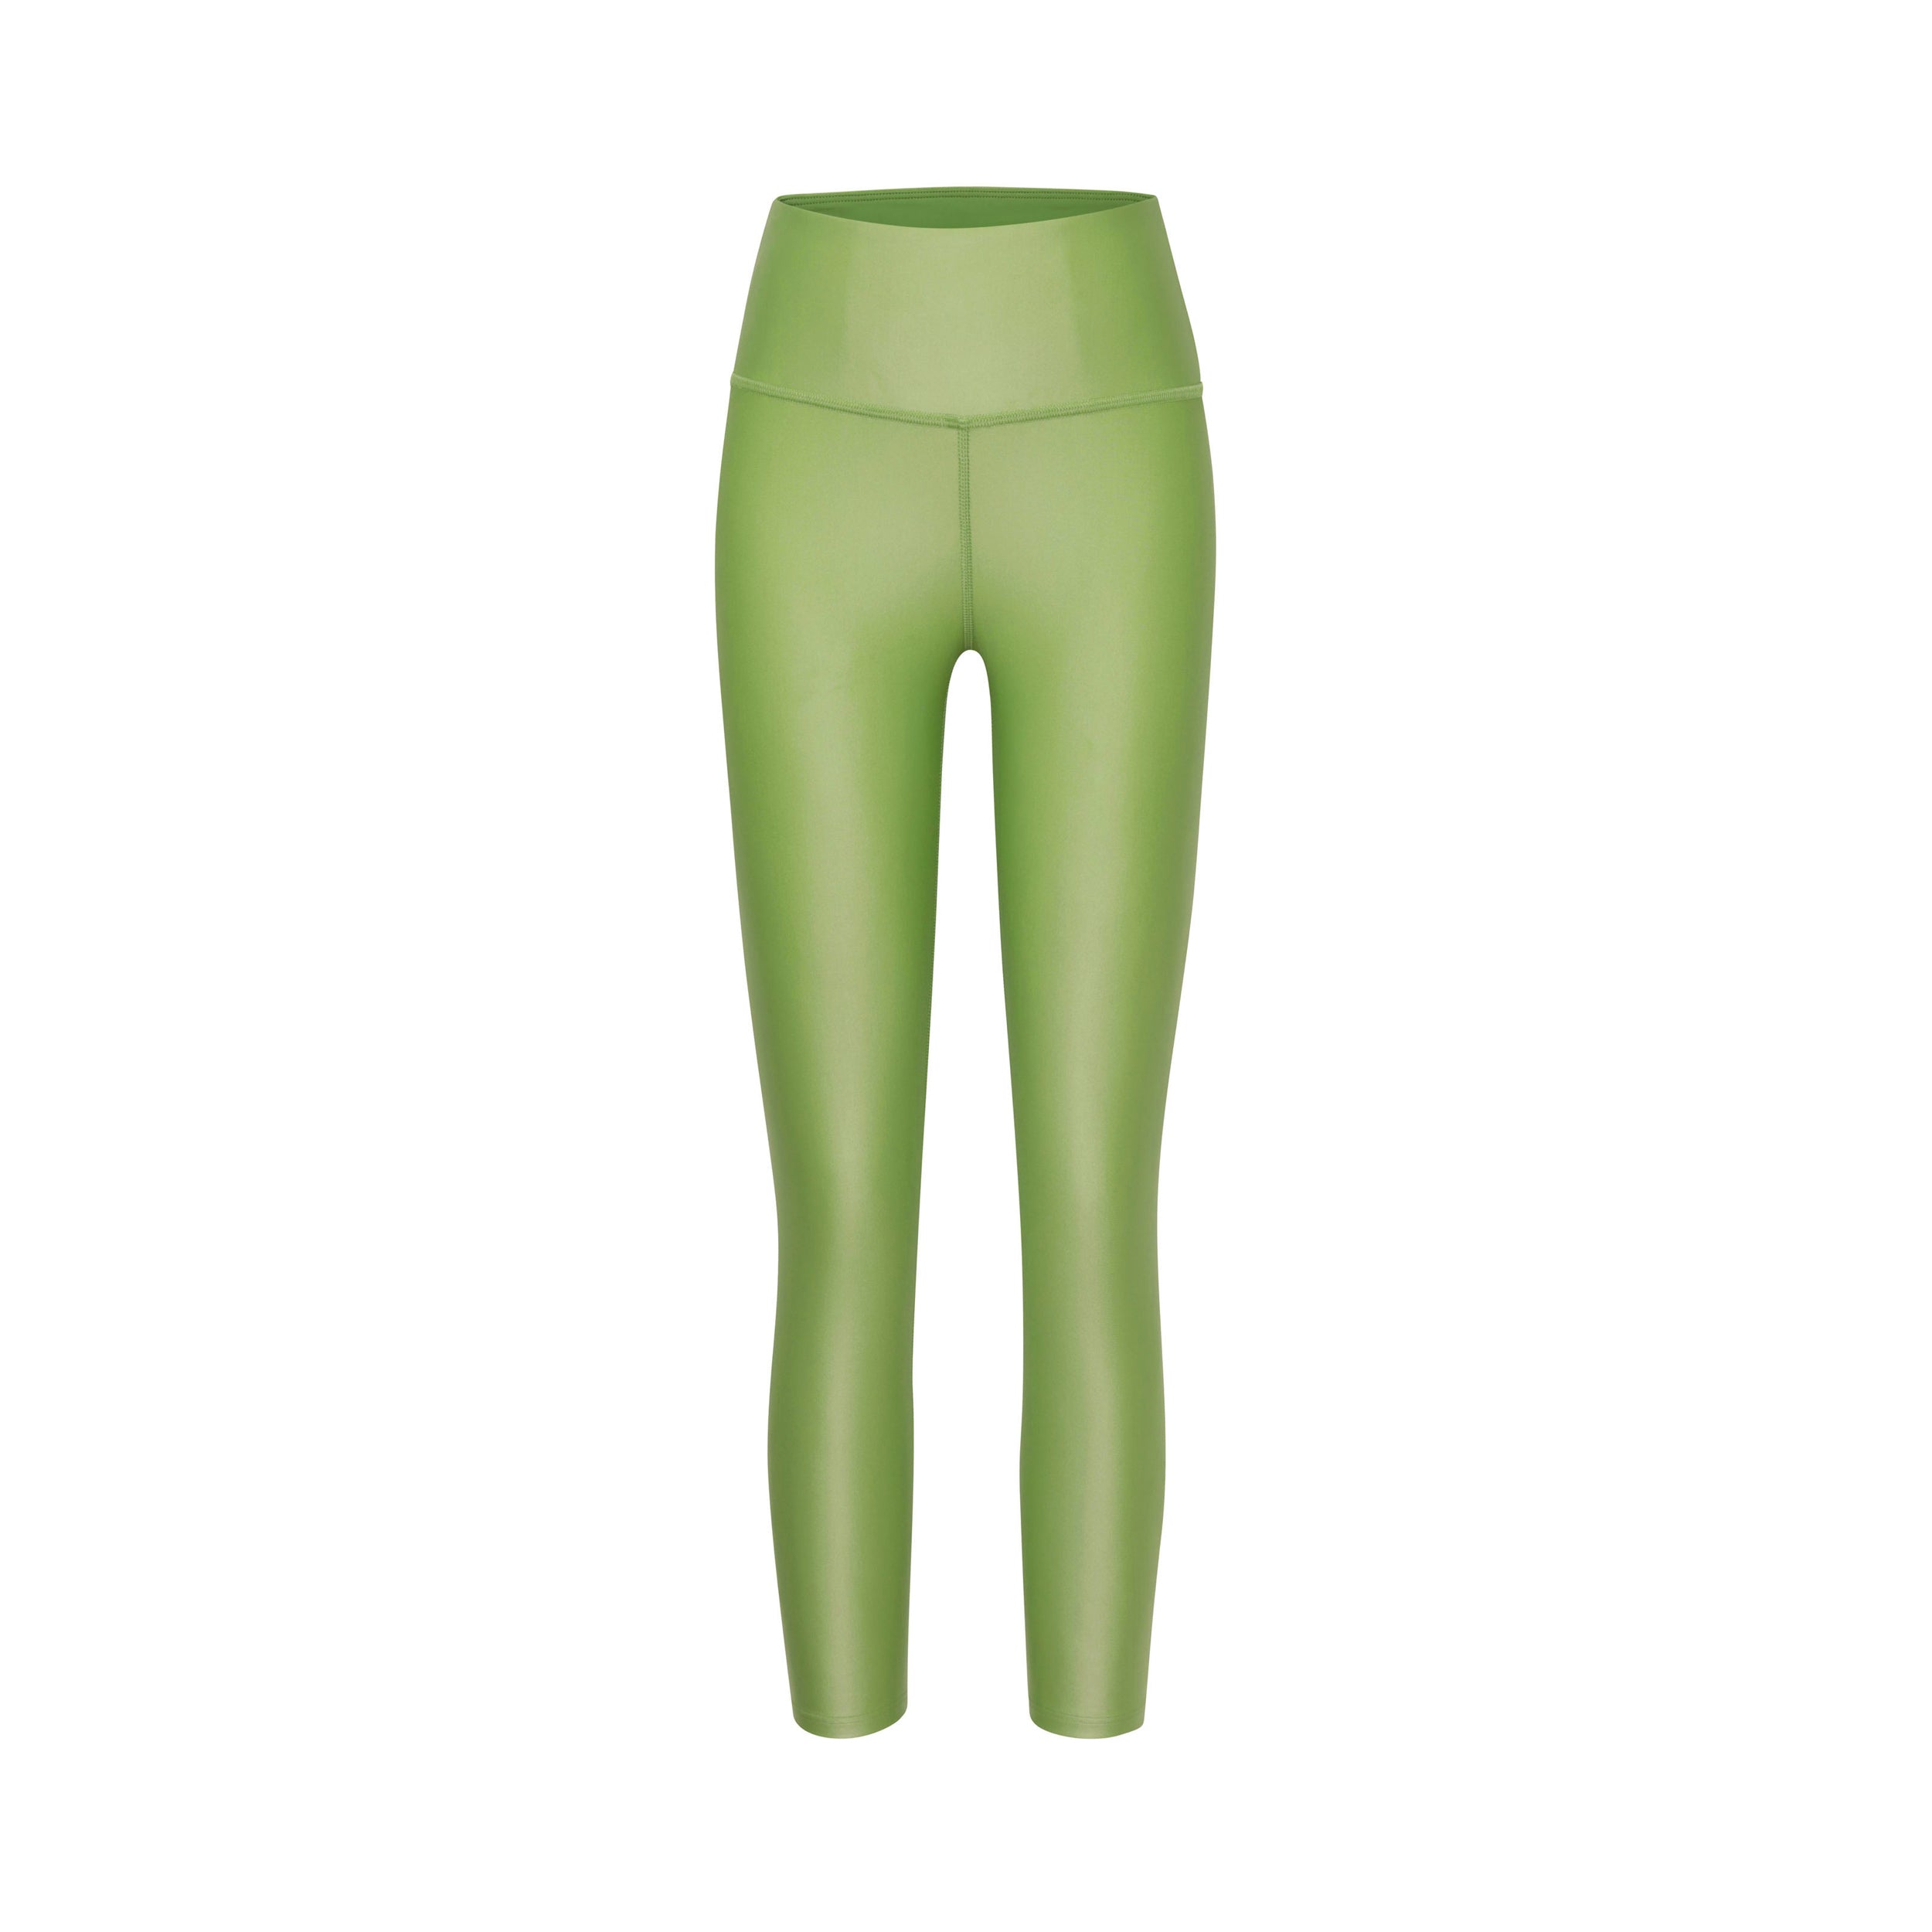 Product shot view of lightweight, lustrous shine, quick drying green liquid leggings